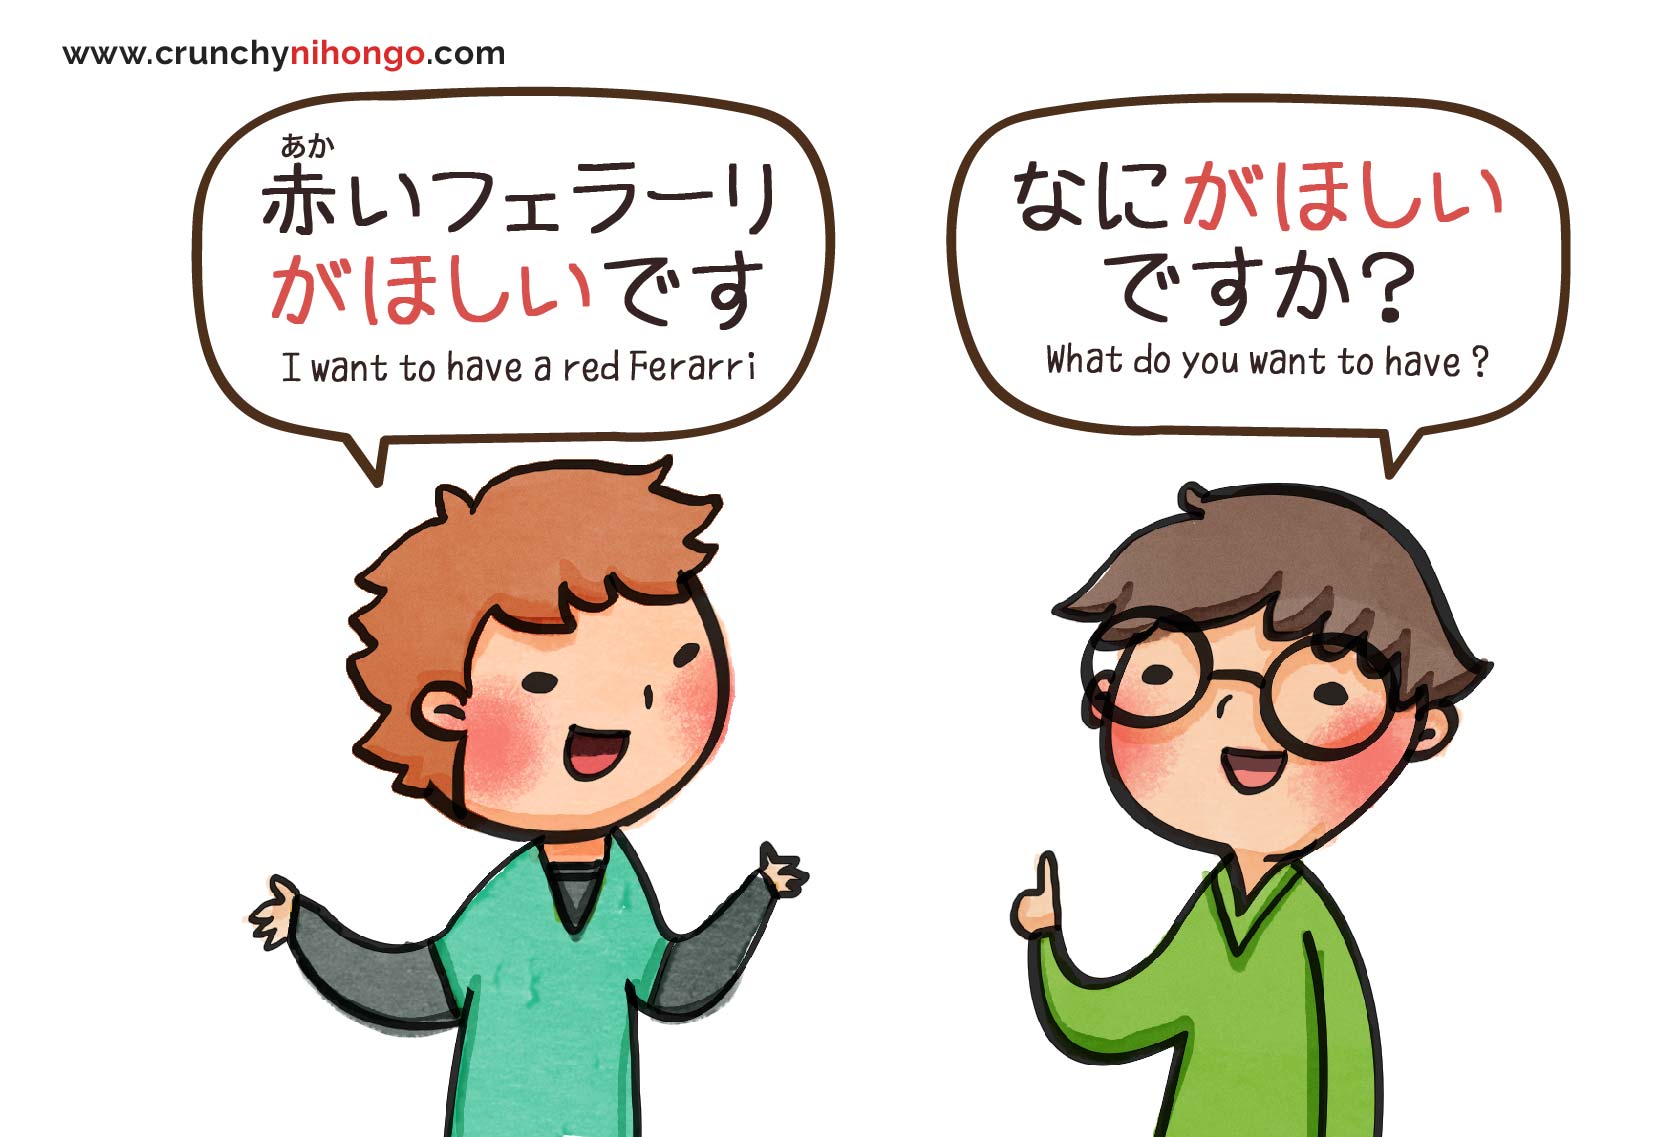 talking-about-your-own-desire-in-japanese